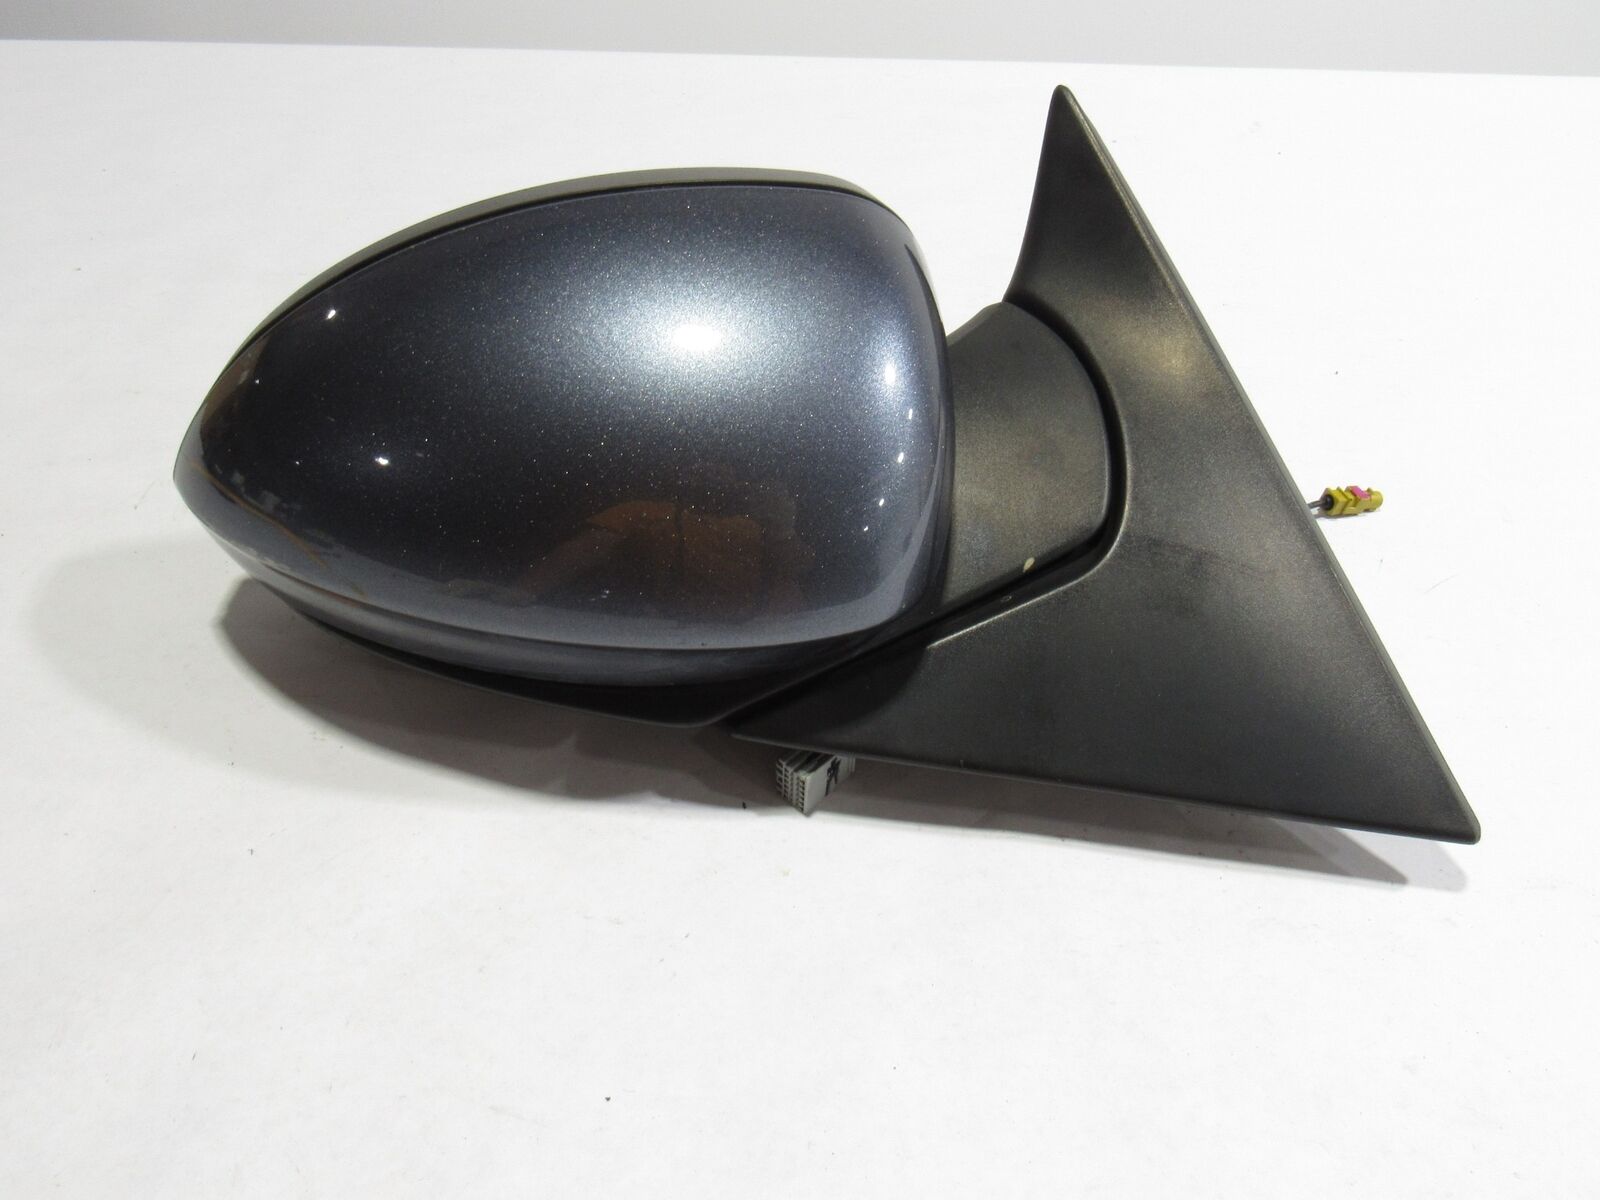 11-12 Fisker Karma 2012 Front Right Exterior Rear View Mirror Glass ;$5